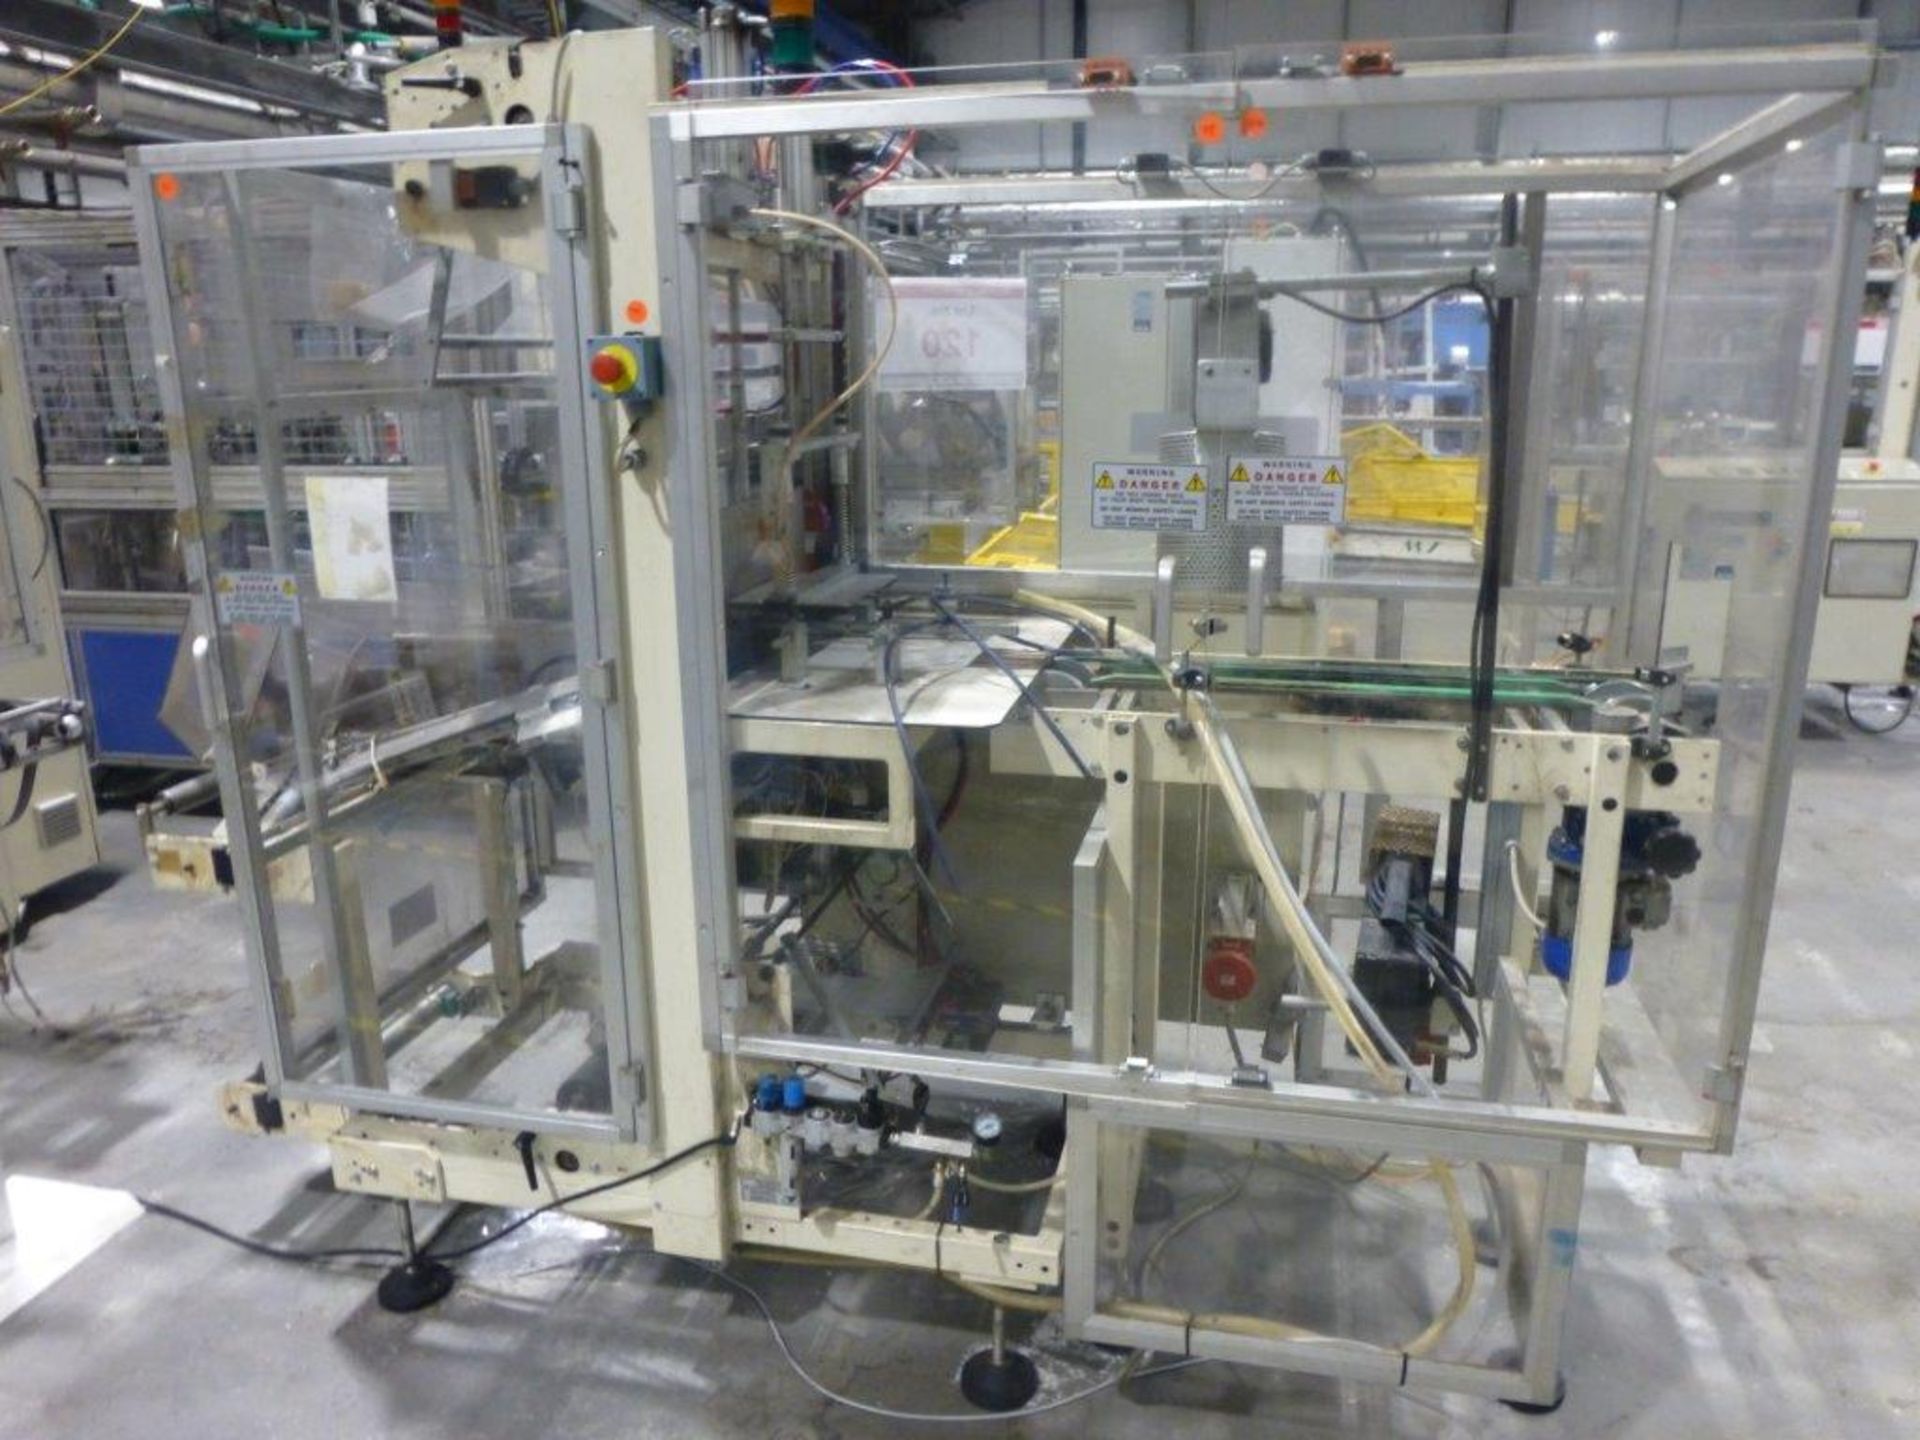 Gima 888 DVD multi case wrapper, serial No 88823H0 (2002) with 2 Leister hot air units. Please note: - Image 3 of 4